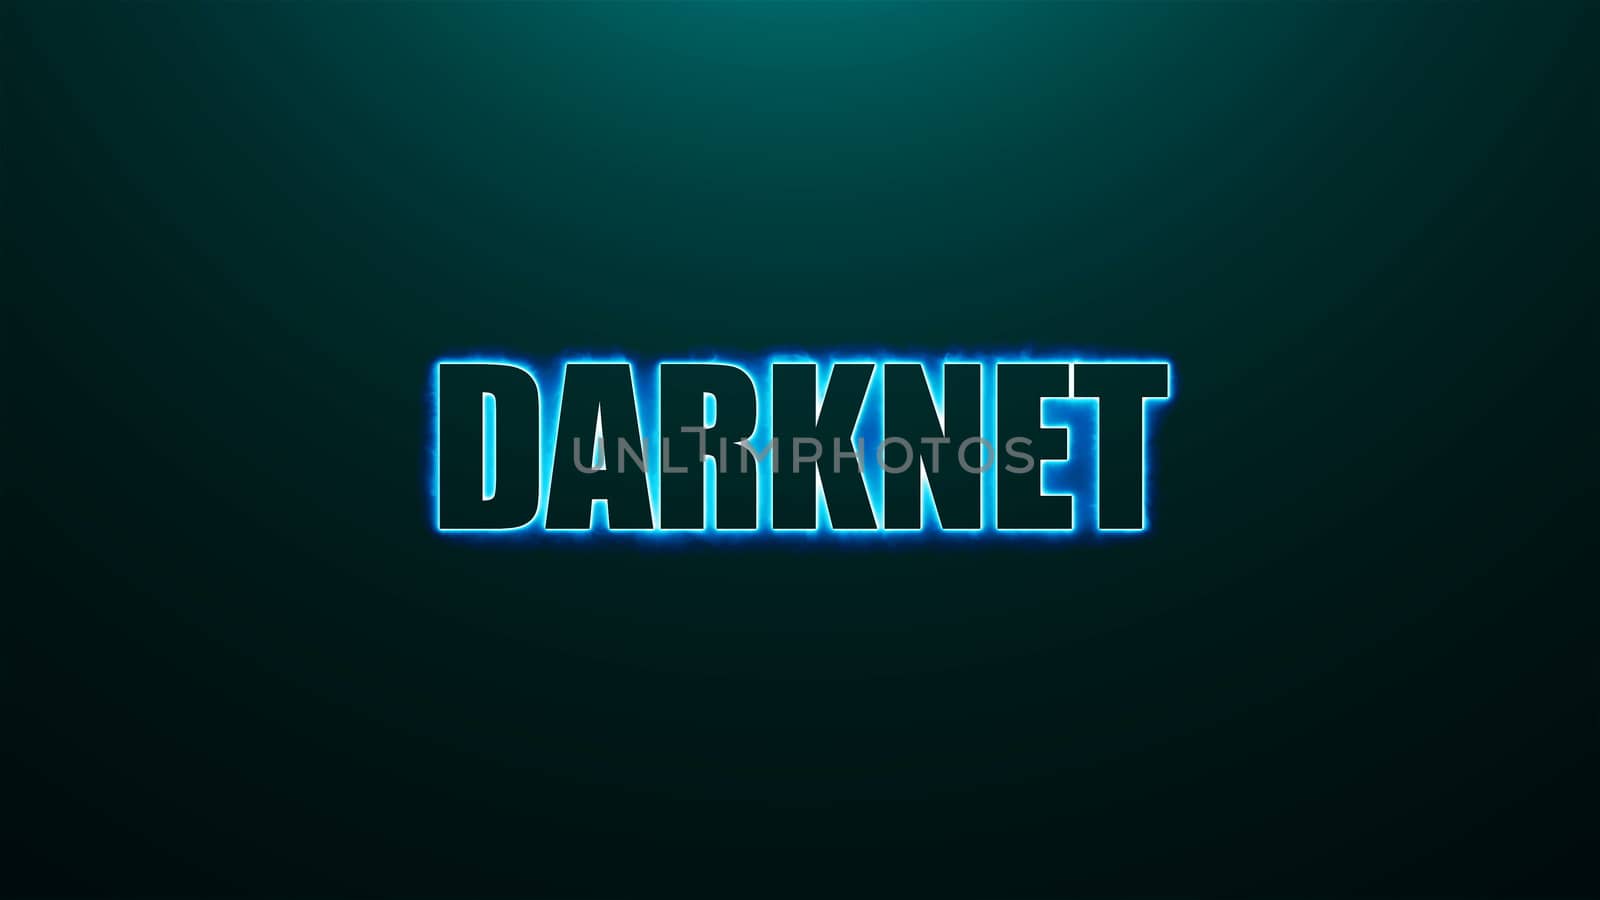 Letters of Darknet text on background with top light, 3d rendering background, computer generating